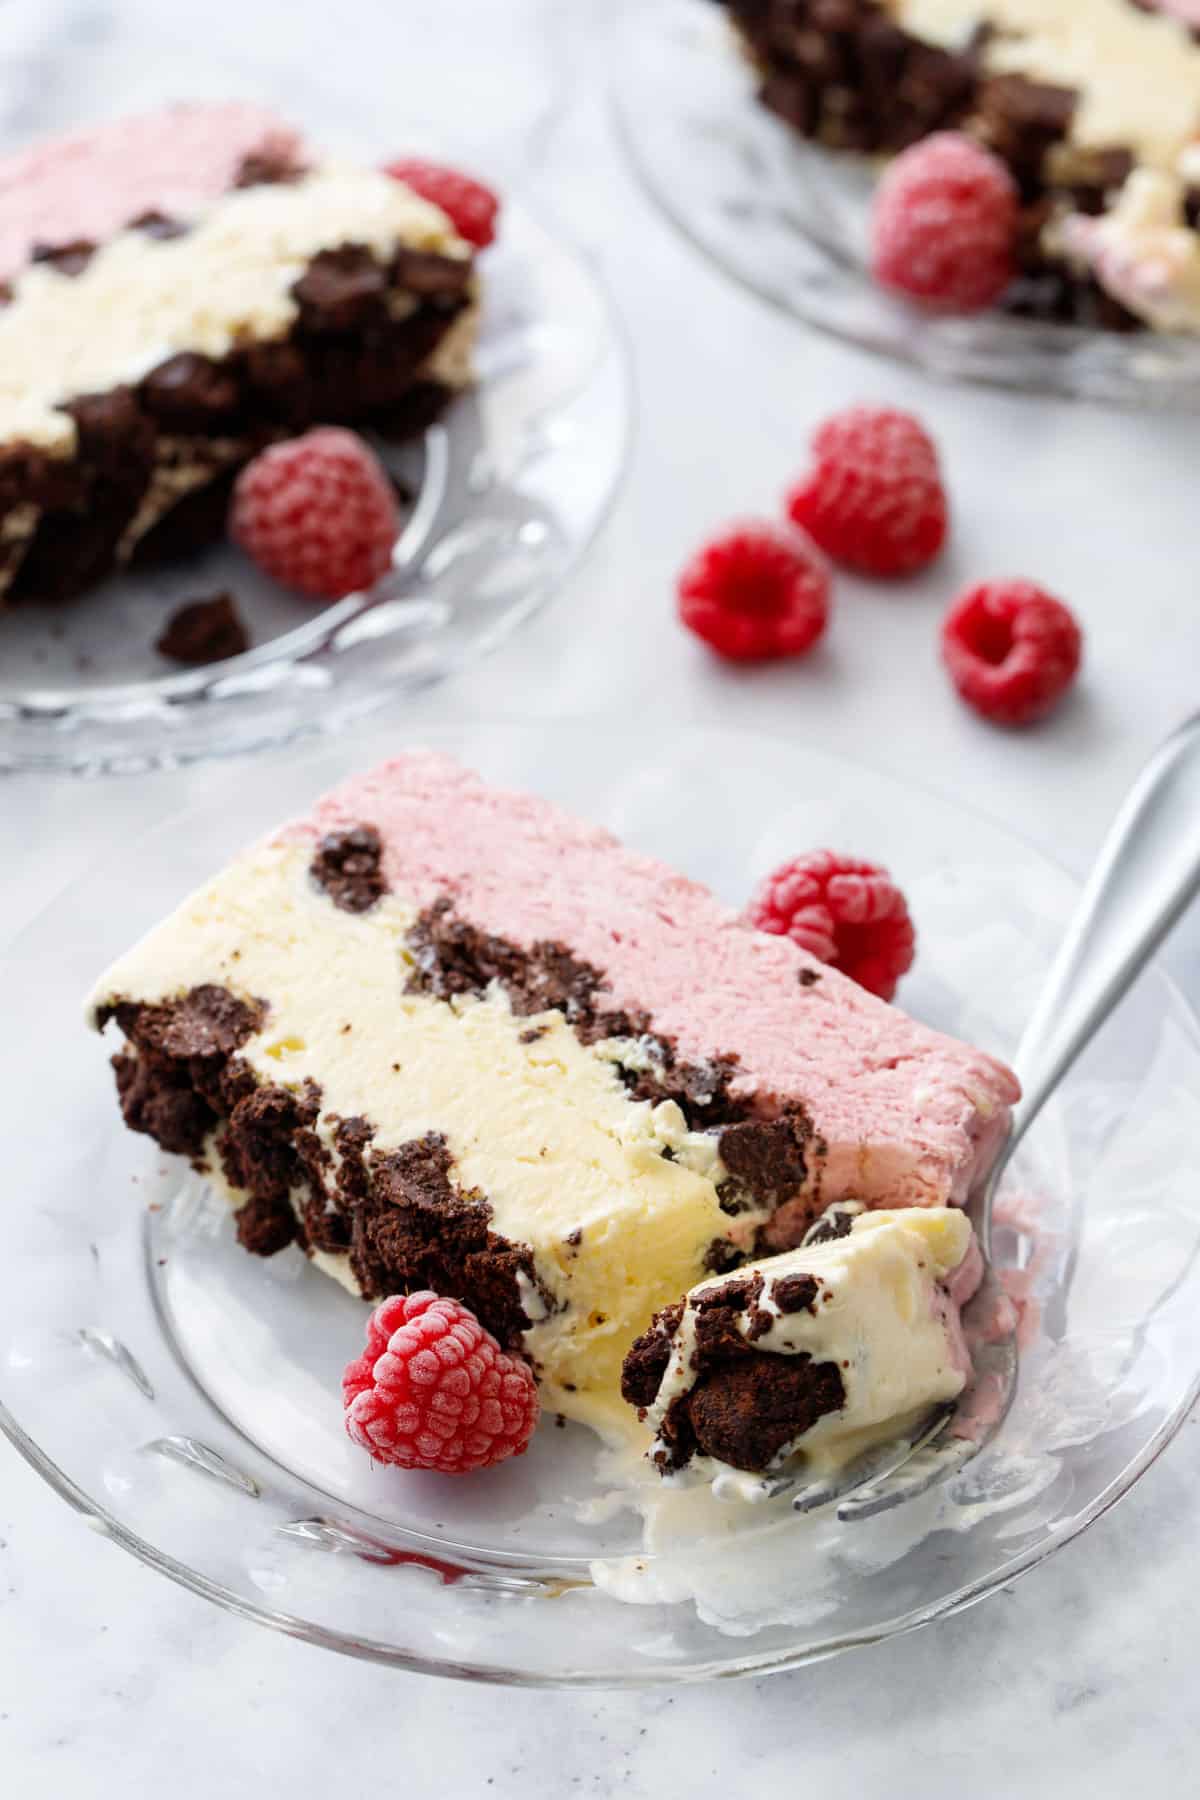 Slices of Raspberry & Passionfruit Semifreddo with Chocolate Crumbs on glass plates, front slice with a forkful taken out of it to show the creamy melty texture.